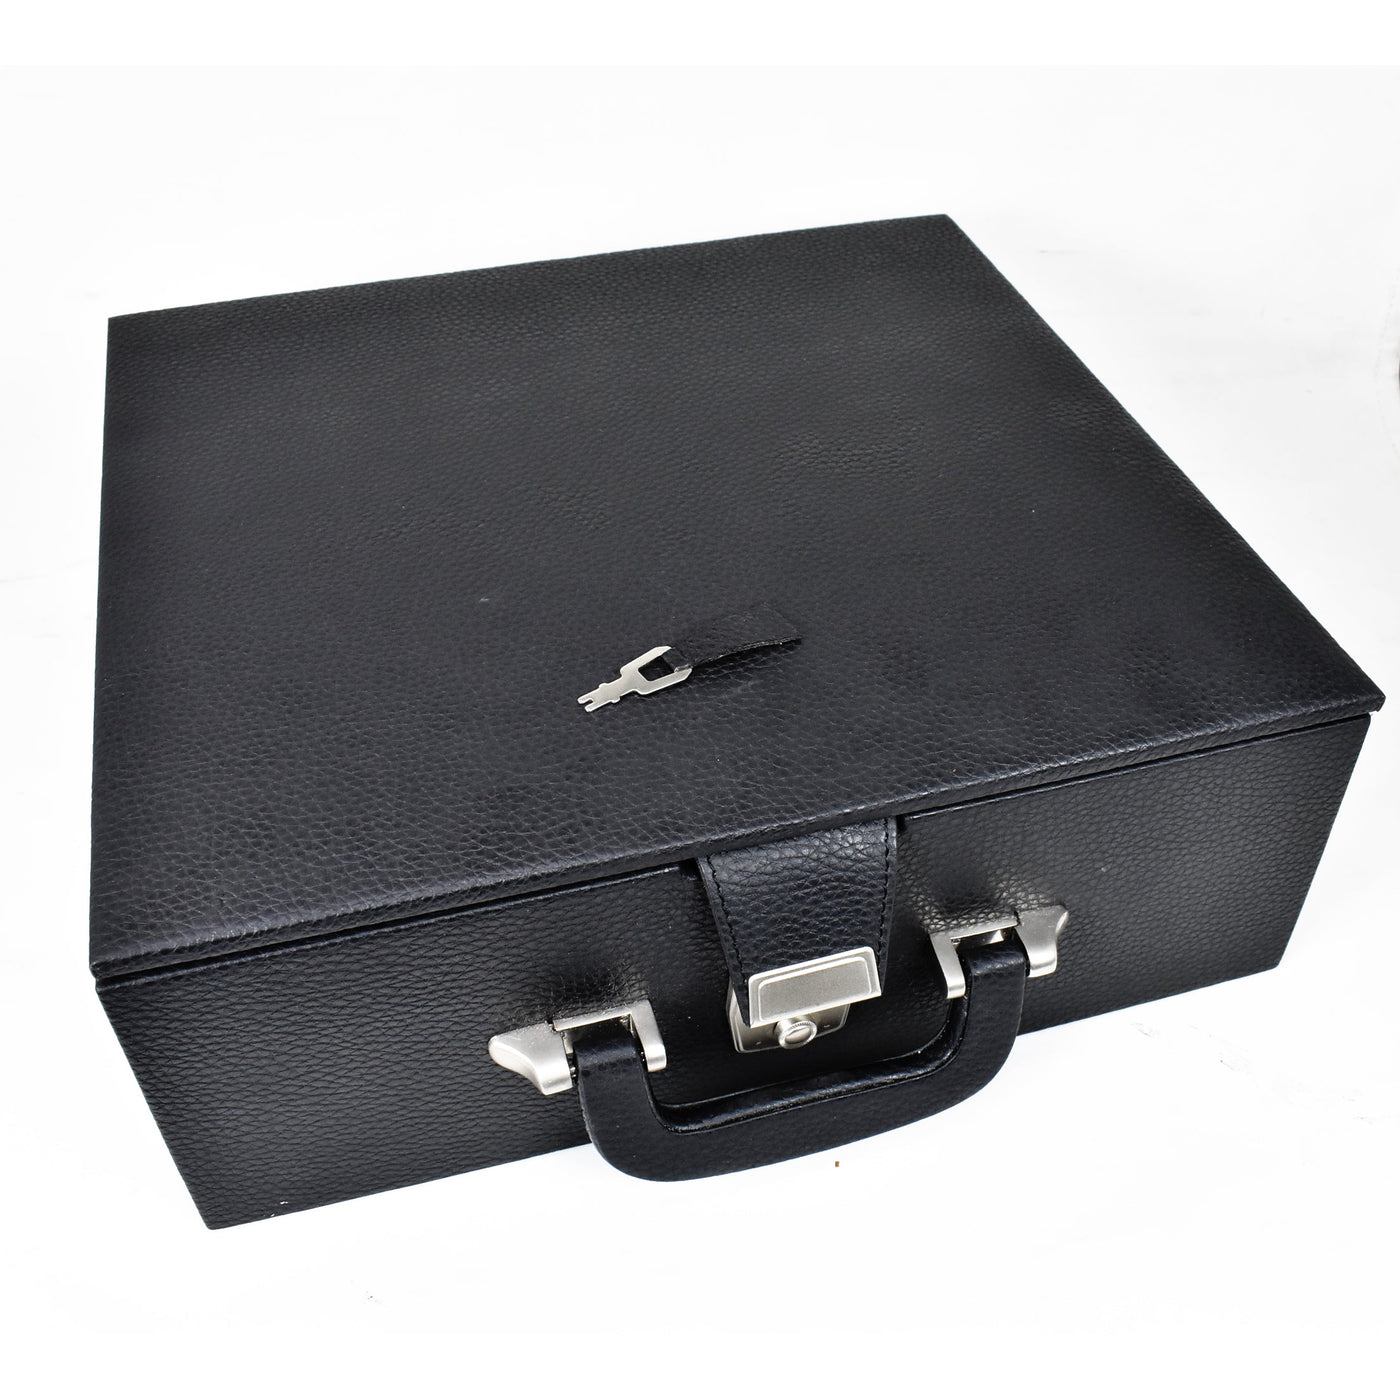 Leatherette Coffer Storage Box for Chess Pieces